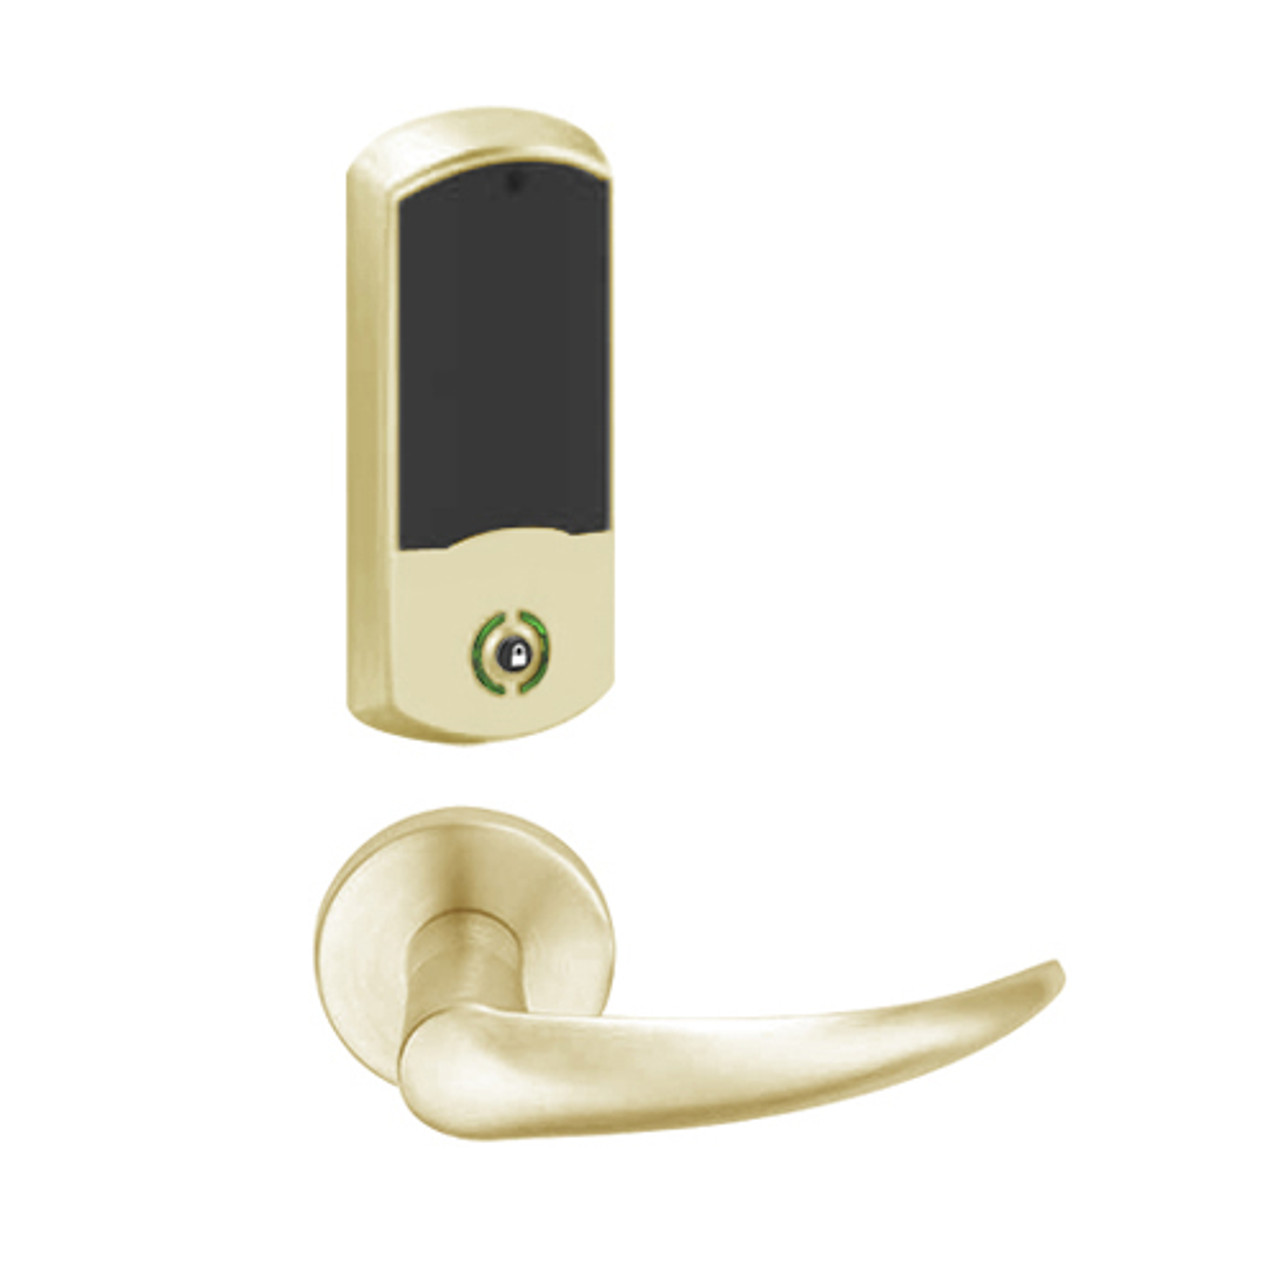 LEMB-GRW-P-OME-606-00C Schlage Privacy/Office Wireless Greenwich Mortise Lock with LED Indicator and Omega Lever in Satin Brass